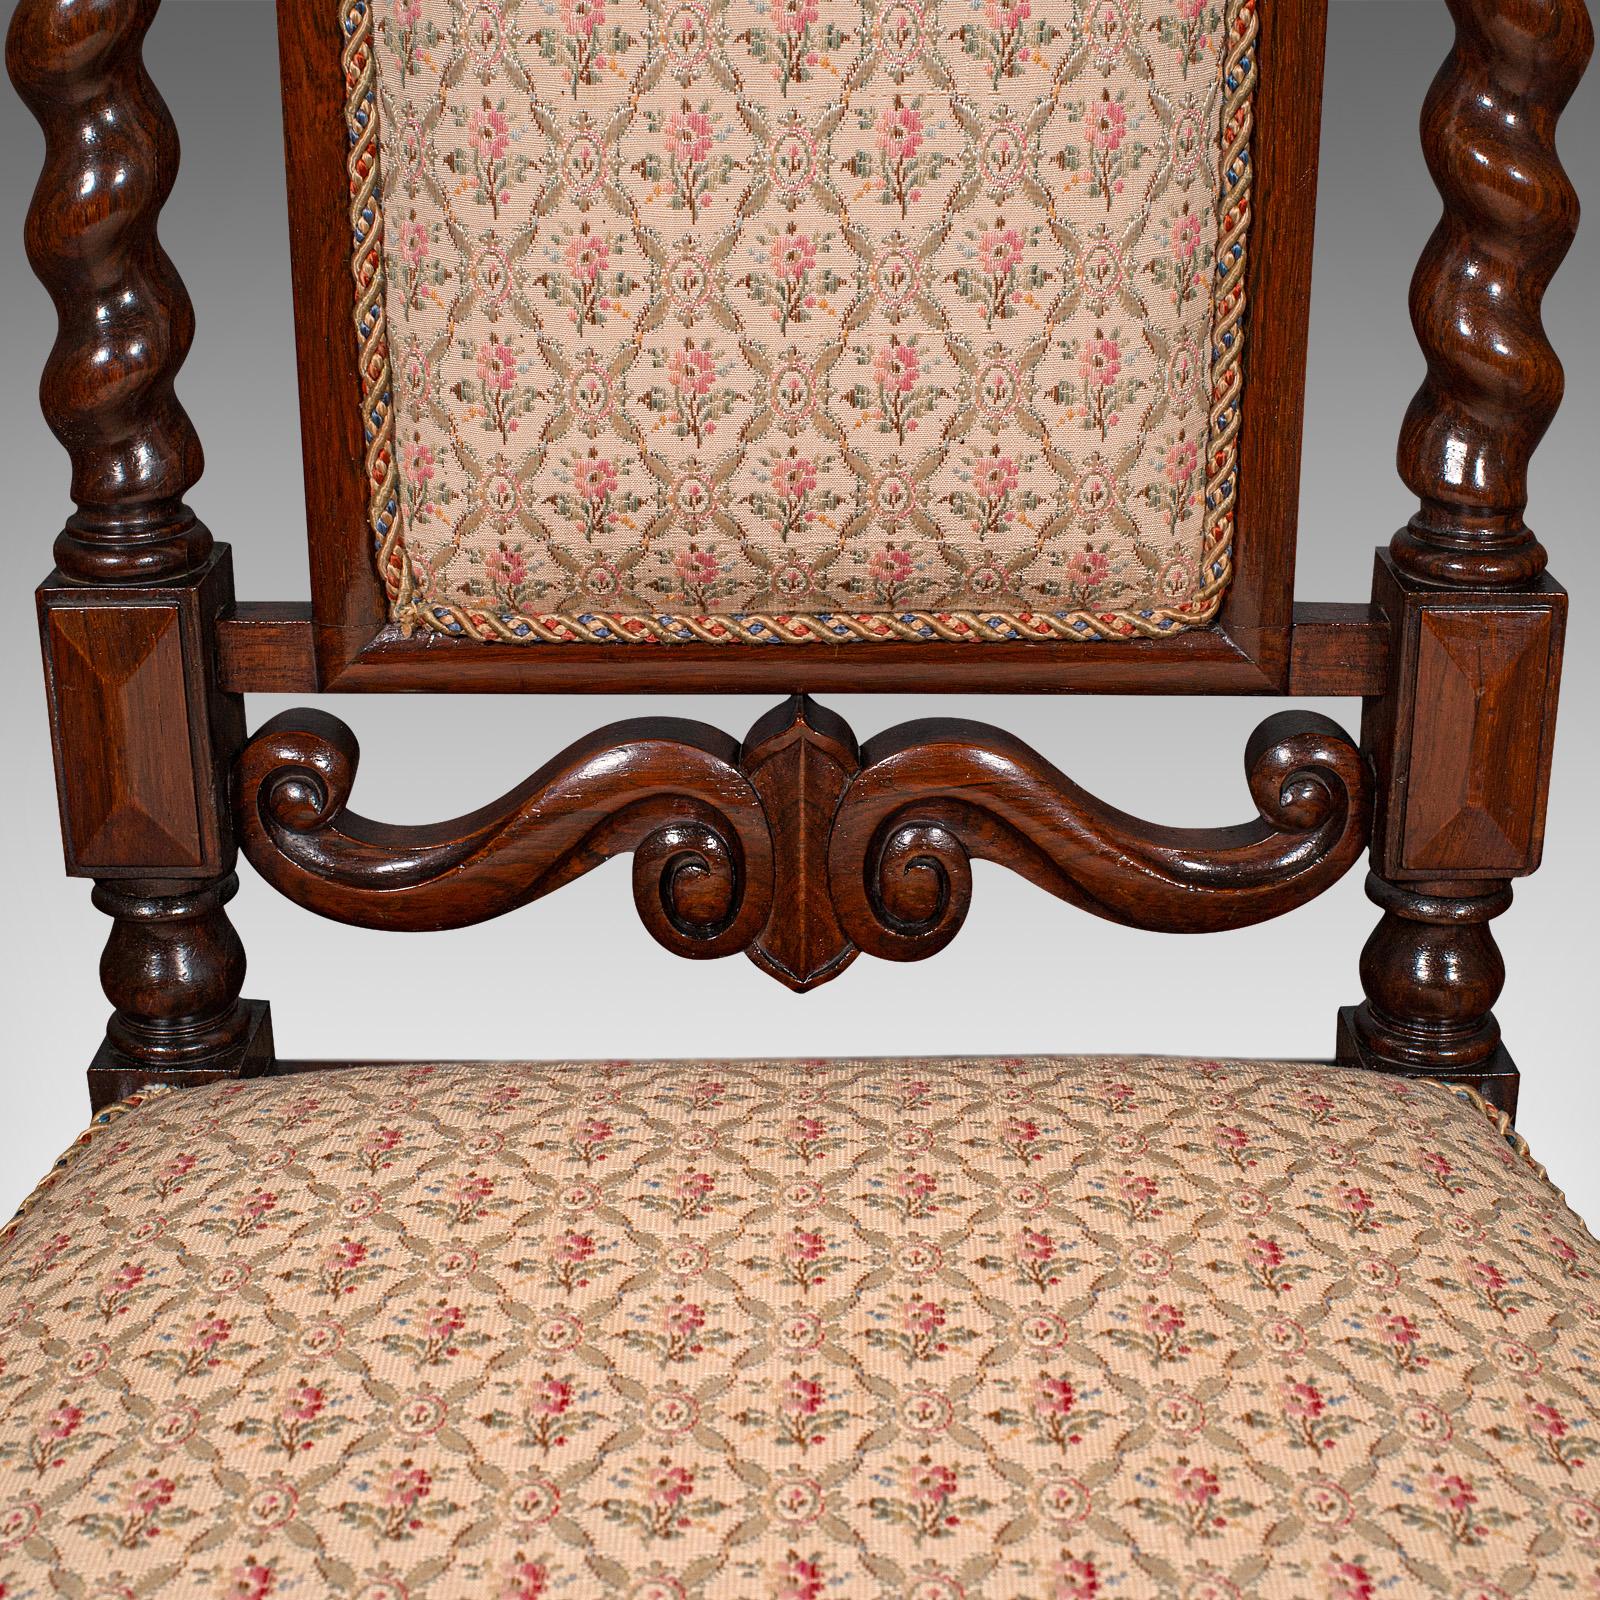 Antique Morning Room Chair, English, Silk Cotton, Side Seat, William IV, C.1835 For Sale 4